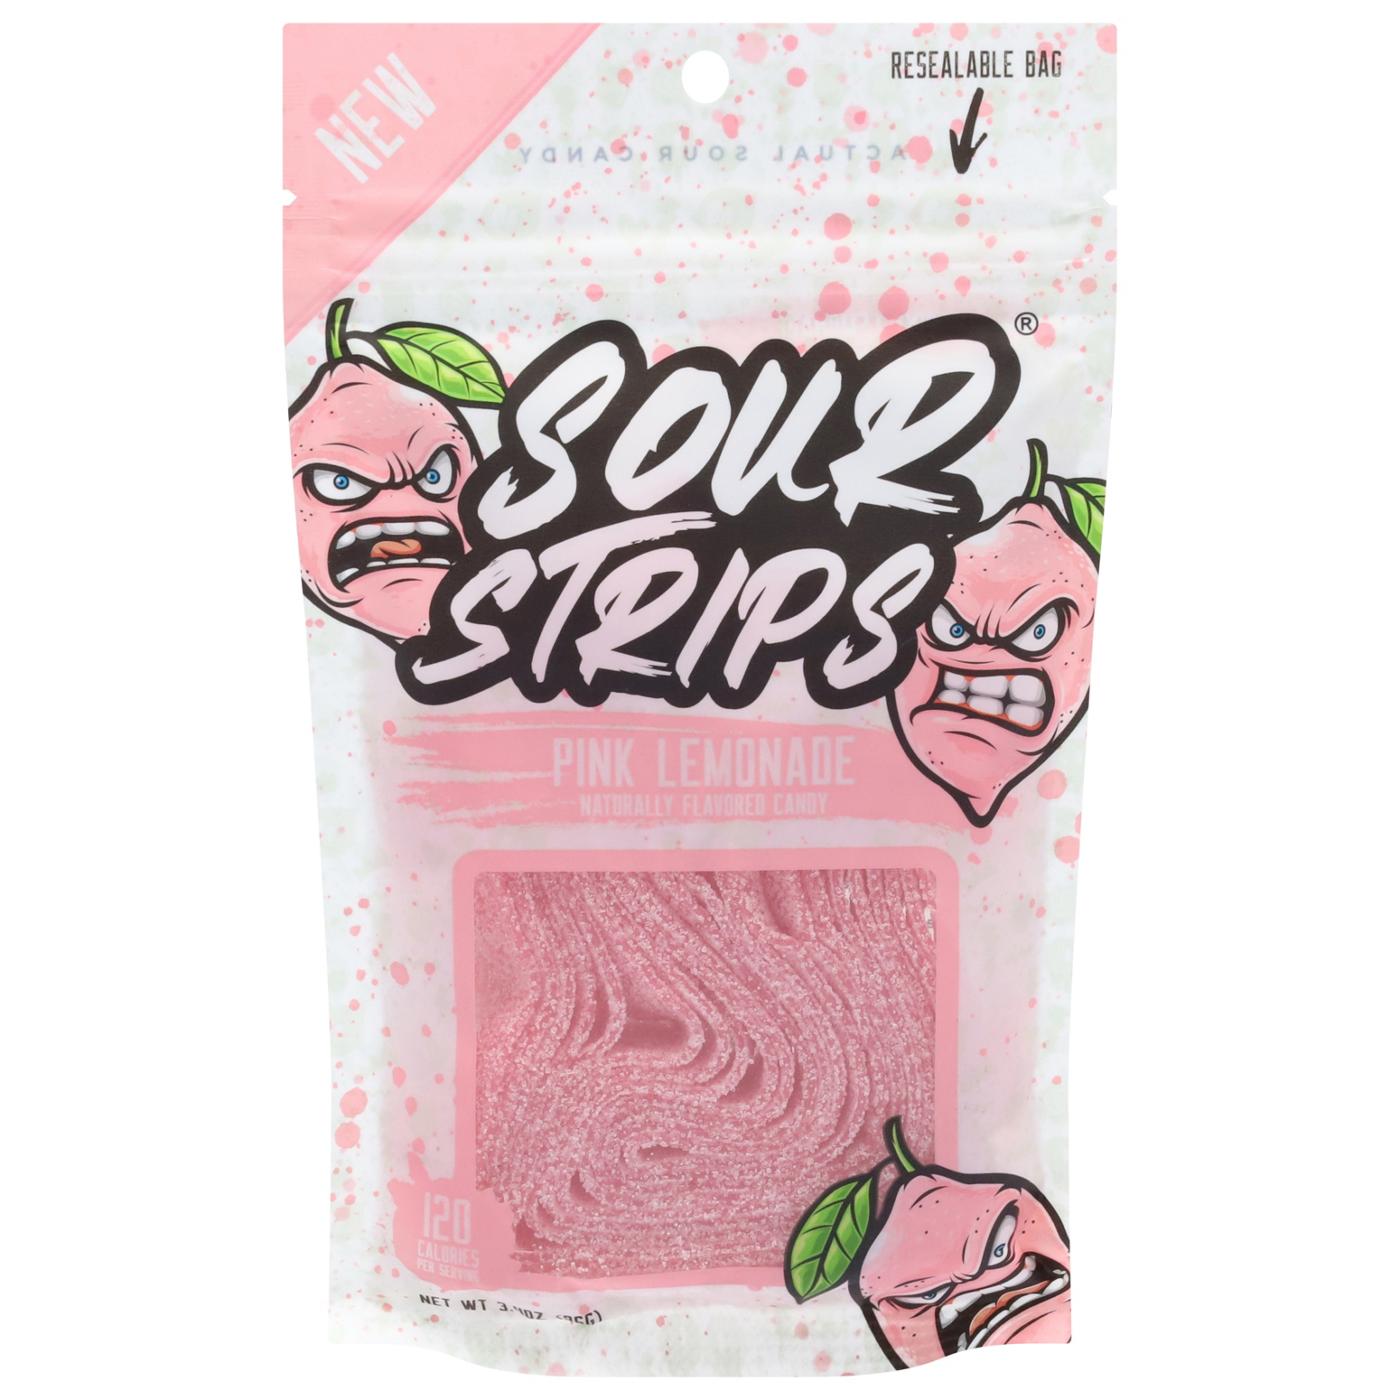 Sour Strips Pink Lemonade Candy; image 1 of 2